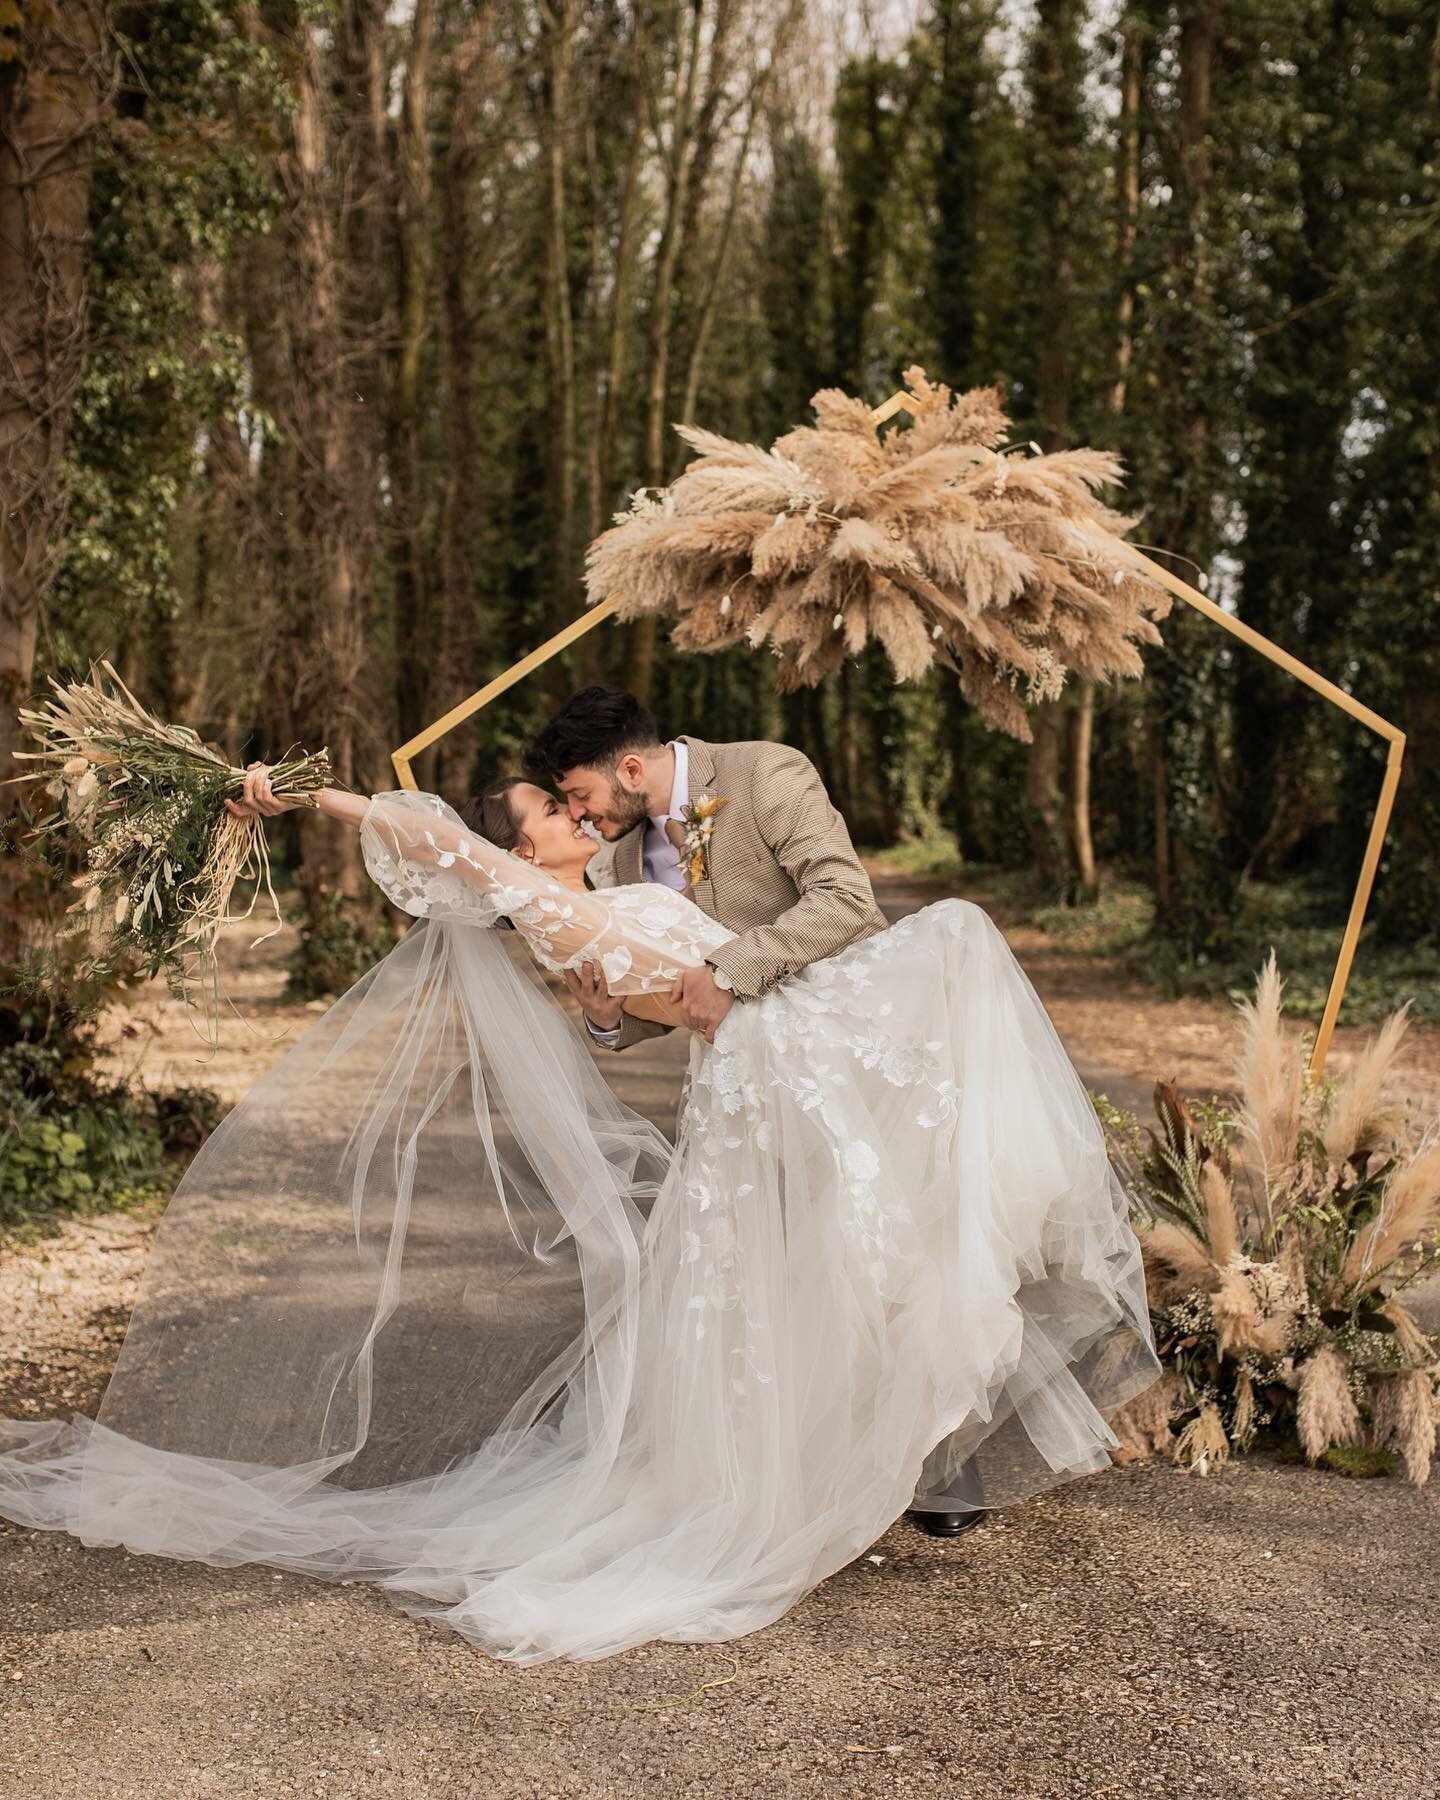 // E L E G A N T //

Floaty and Neutral, were the keywords for this incredible shoot at @windmillvenue and oh my goodness I think we excelled all expectation for the day! ✨

After the love we received for our post yesterday we couldn&rsquo;t wait to 